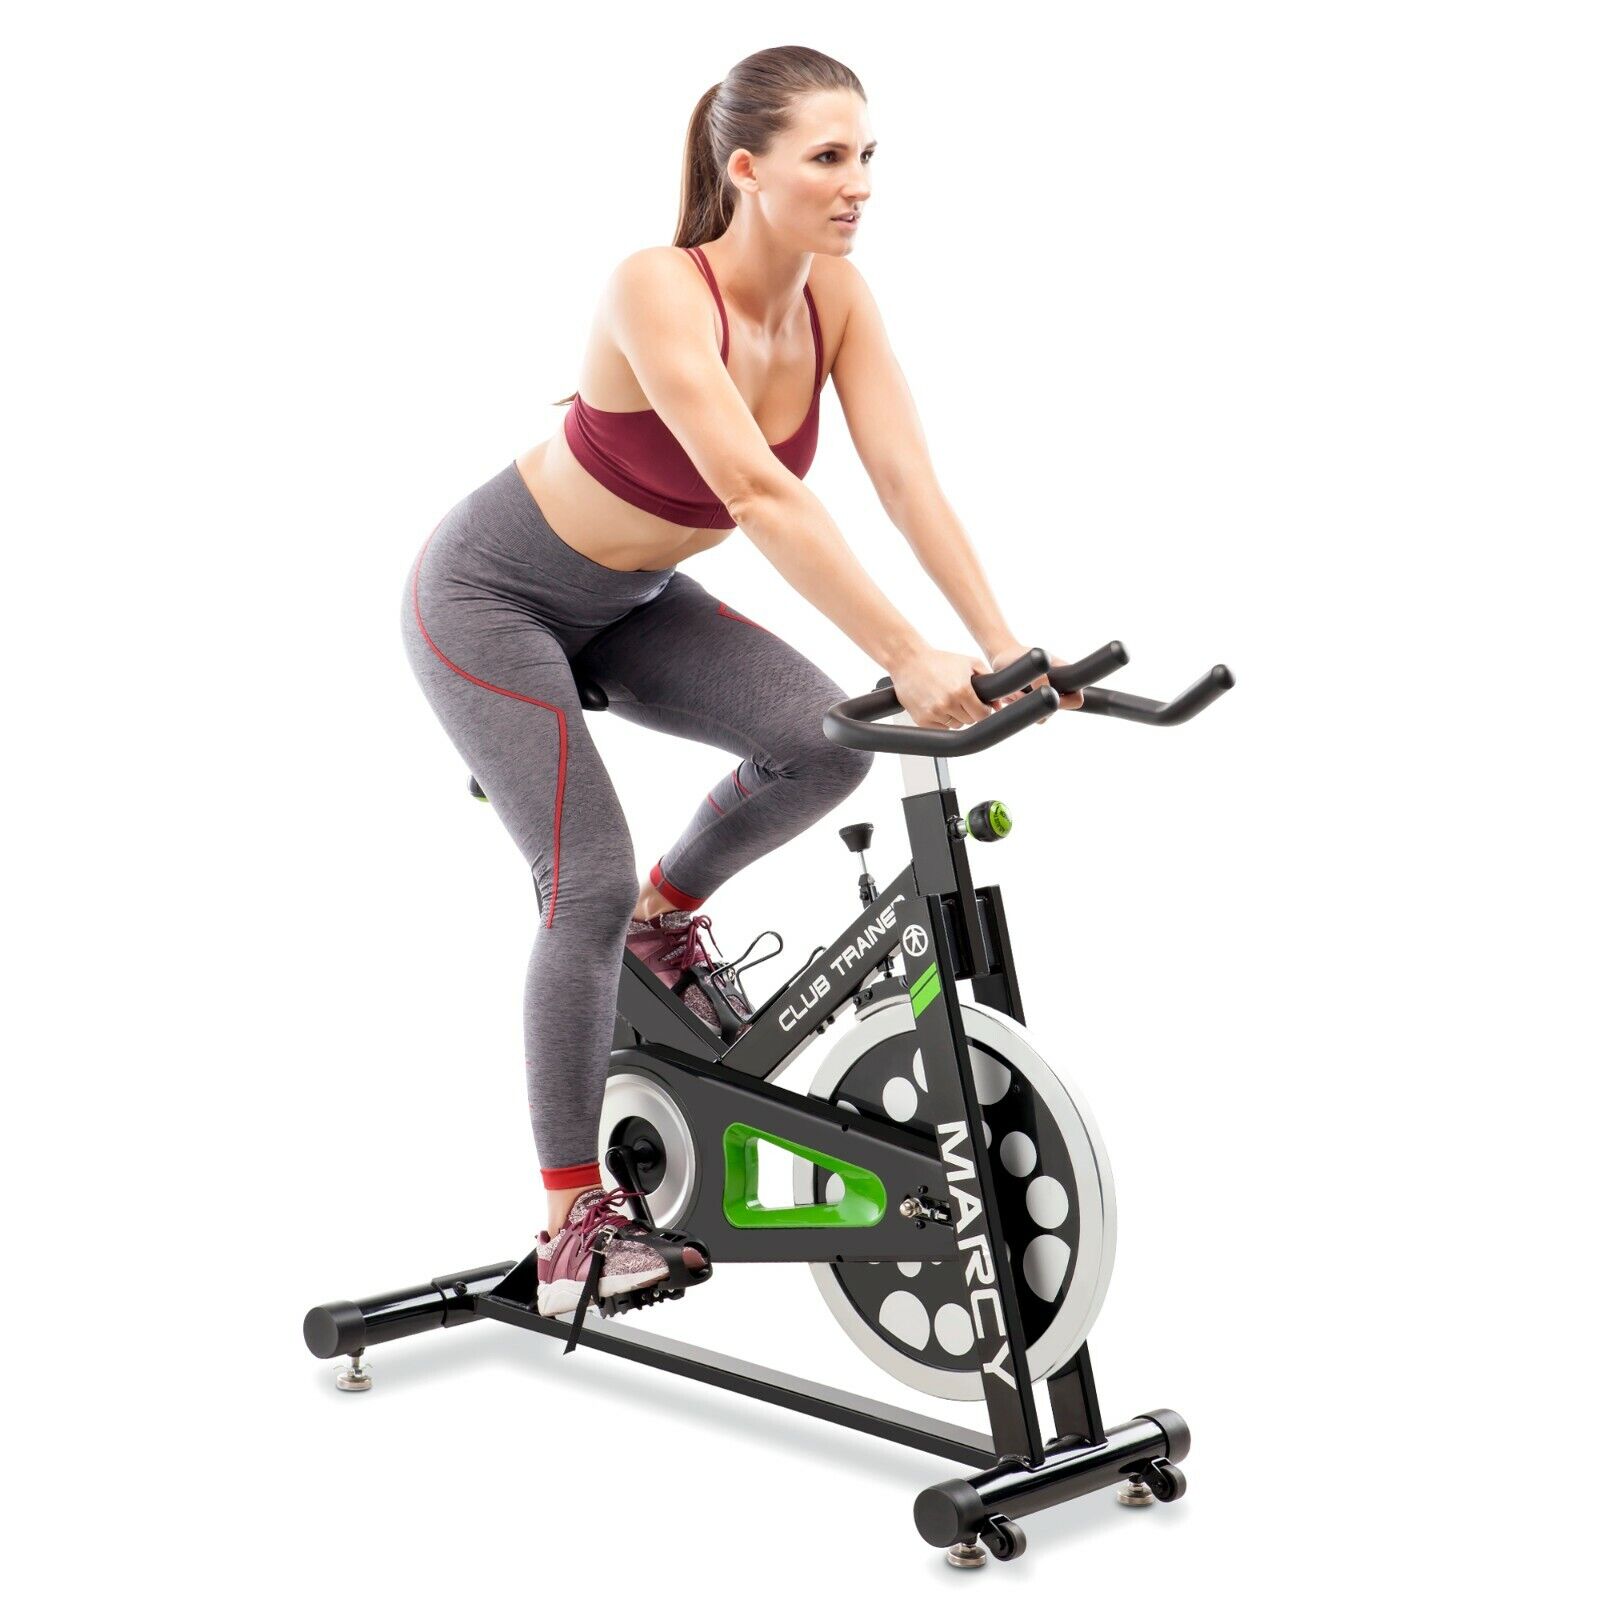 Marcy Revolution Cycle XJ-3220 Indoor Gym Trainer Exercise Stationary Pedal Bike Marcy XJ3220